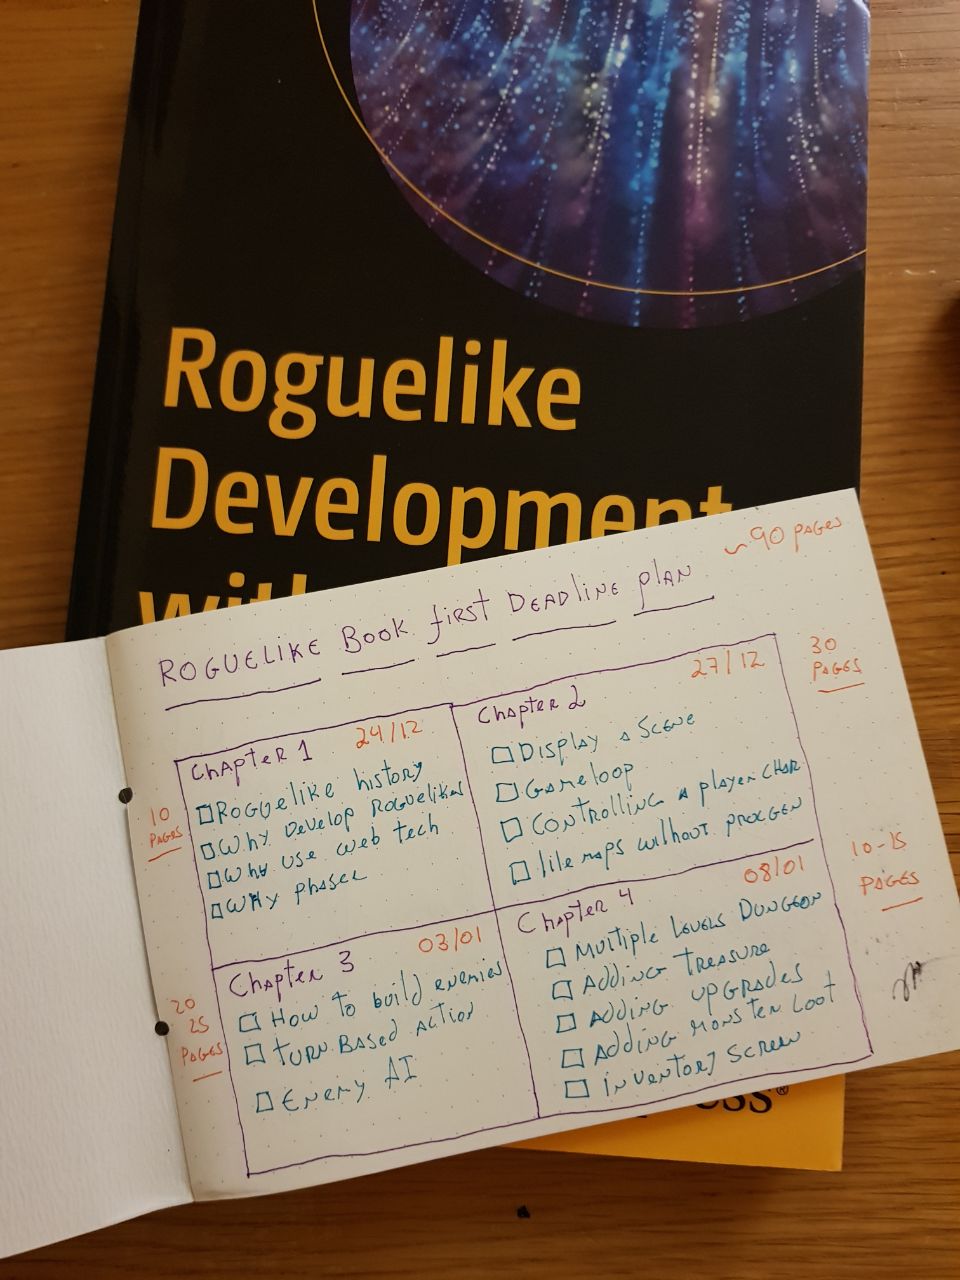 Initial brainstorm for my Roguelike Development book. It didn't go as planned in there...